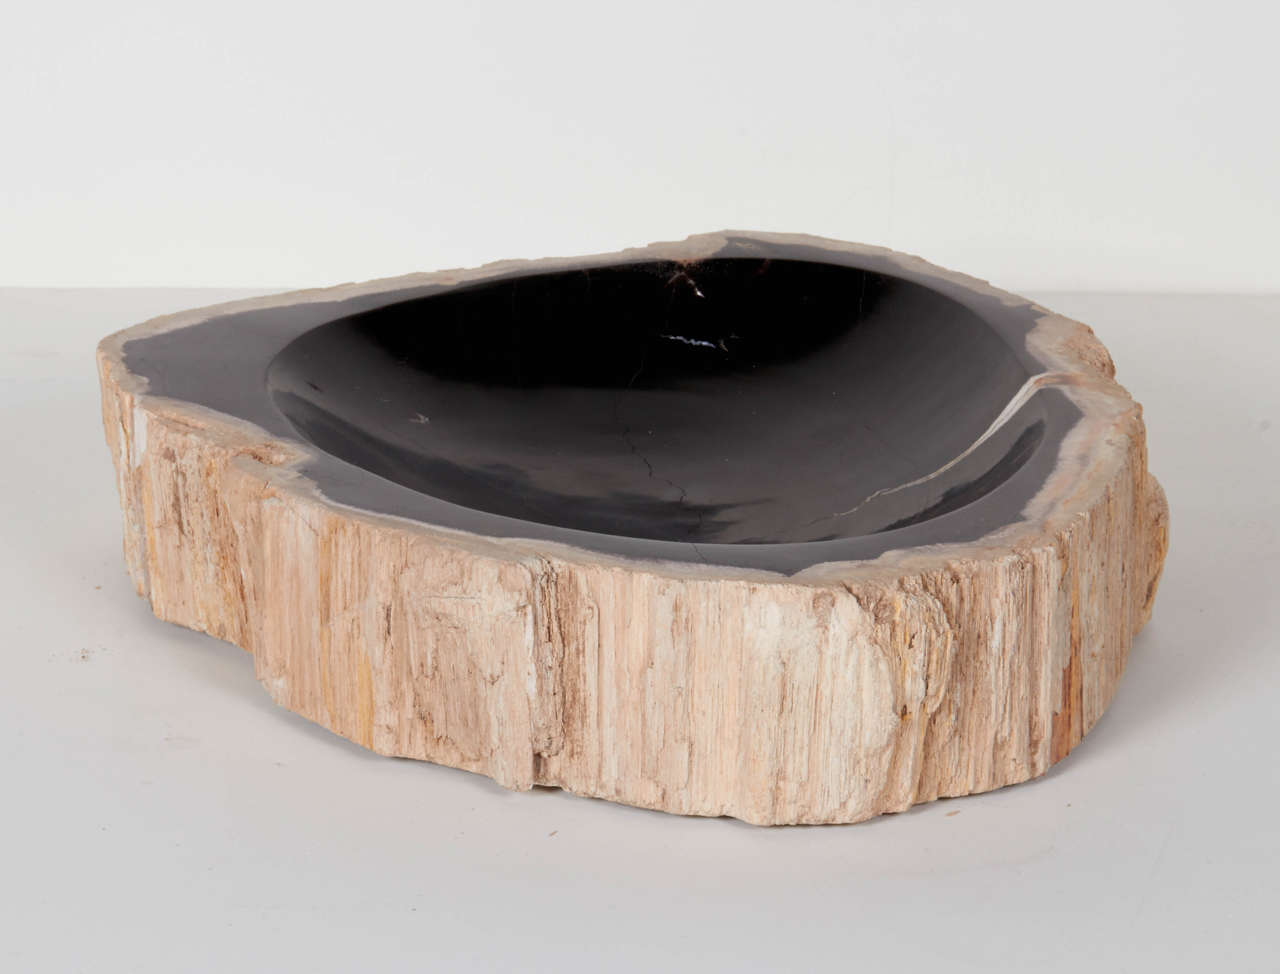 Exquisite large petrified wood vessel. Naturally fossilized throughout hundreds of years. These rare pieces have been hand cut and feature the highest quality petrified wood with polished centers and natural raw edges. Beautiful tones with black